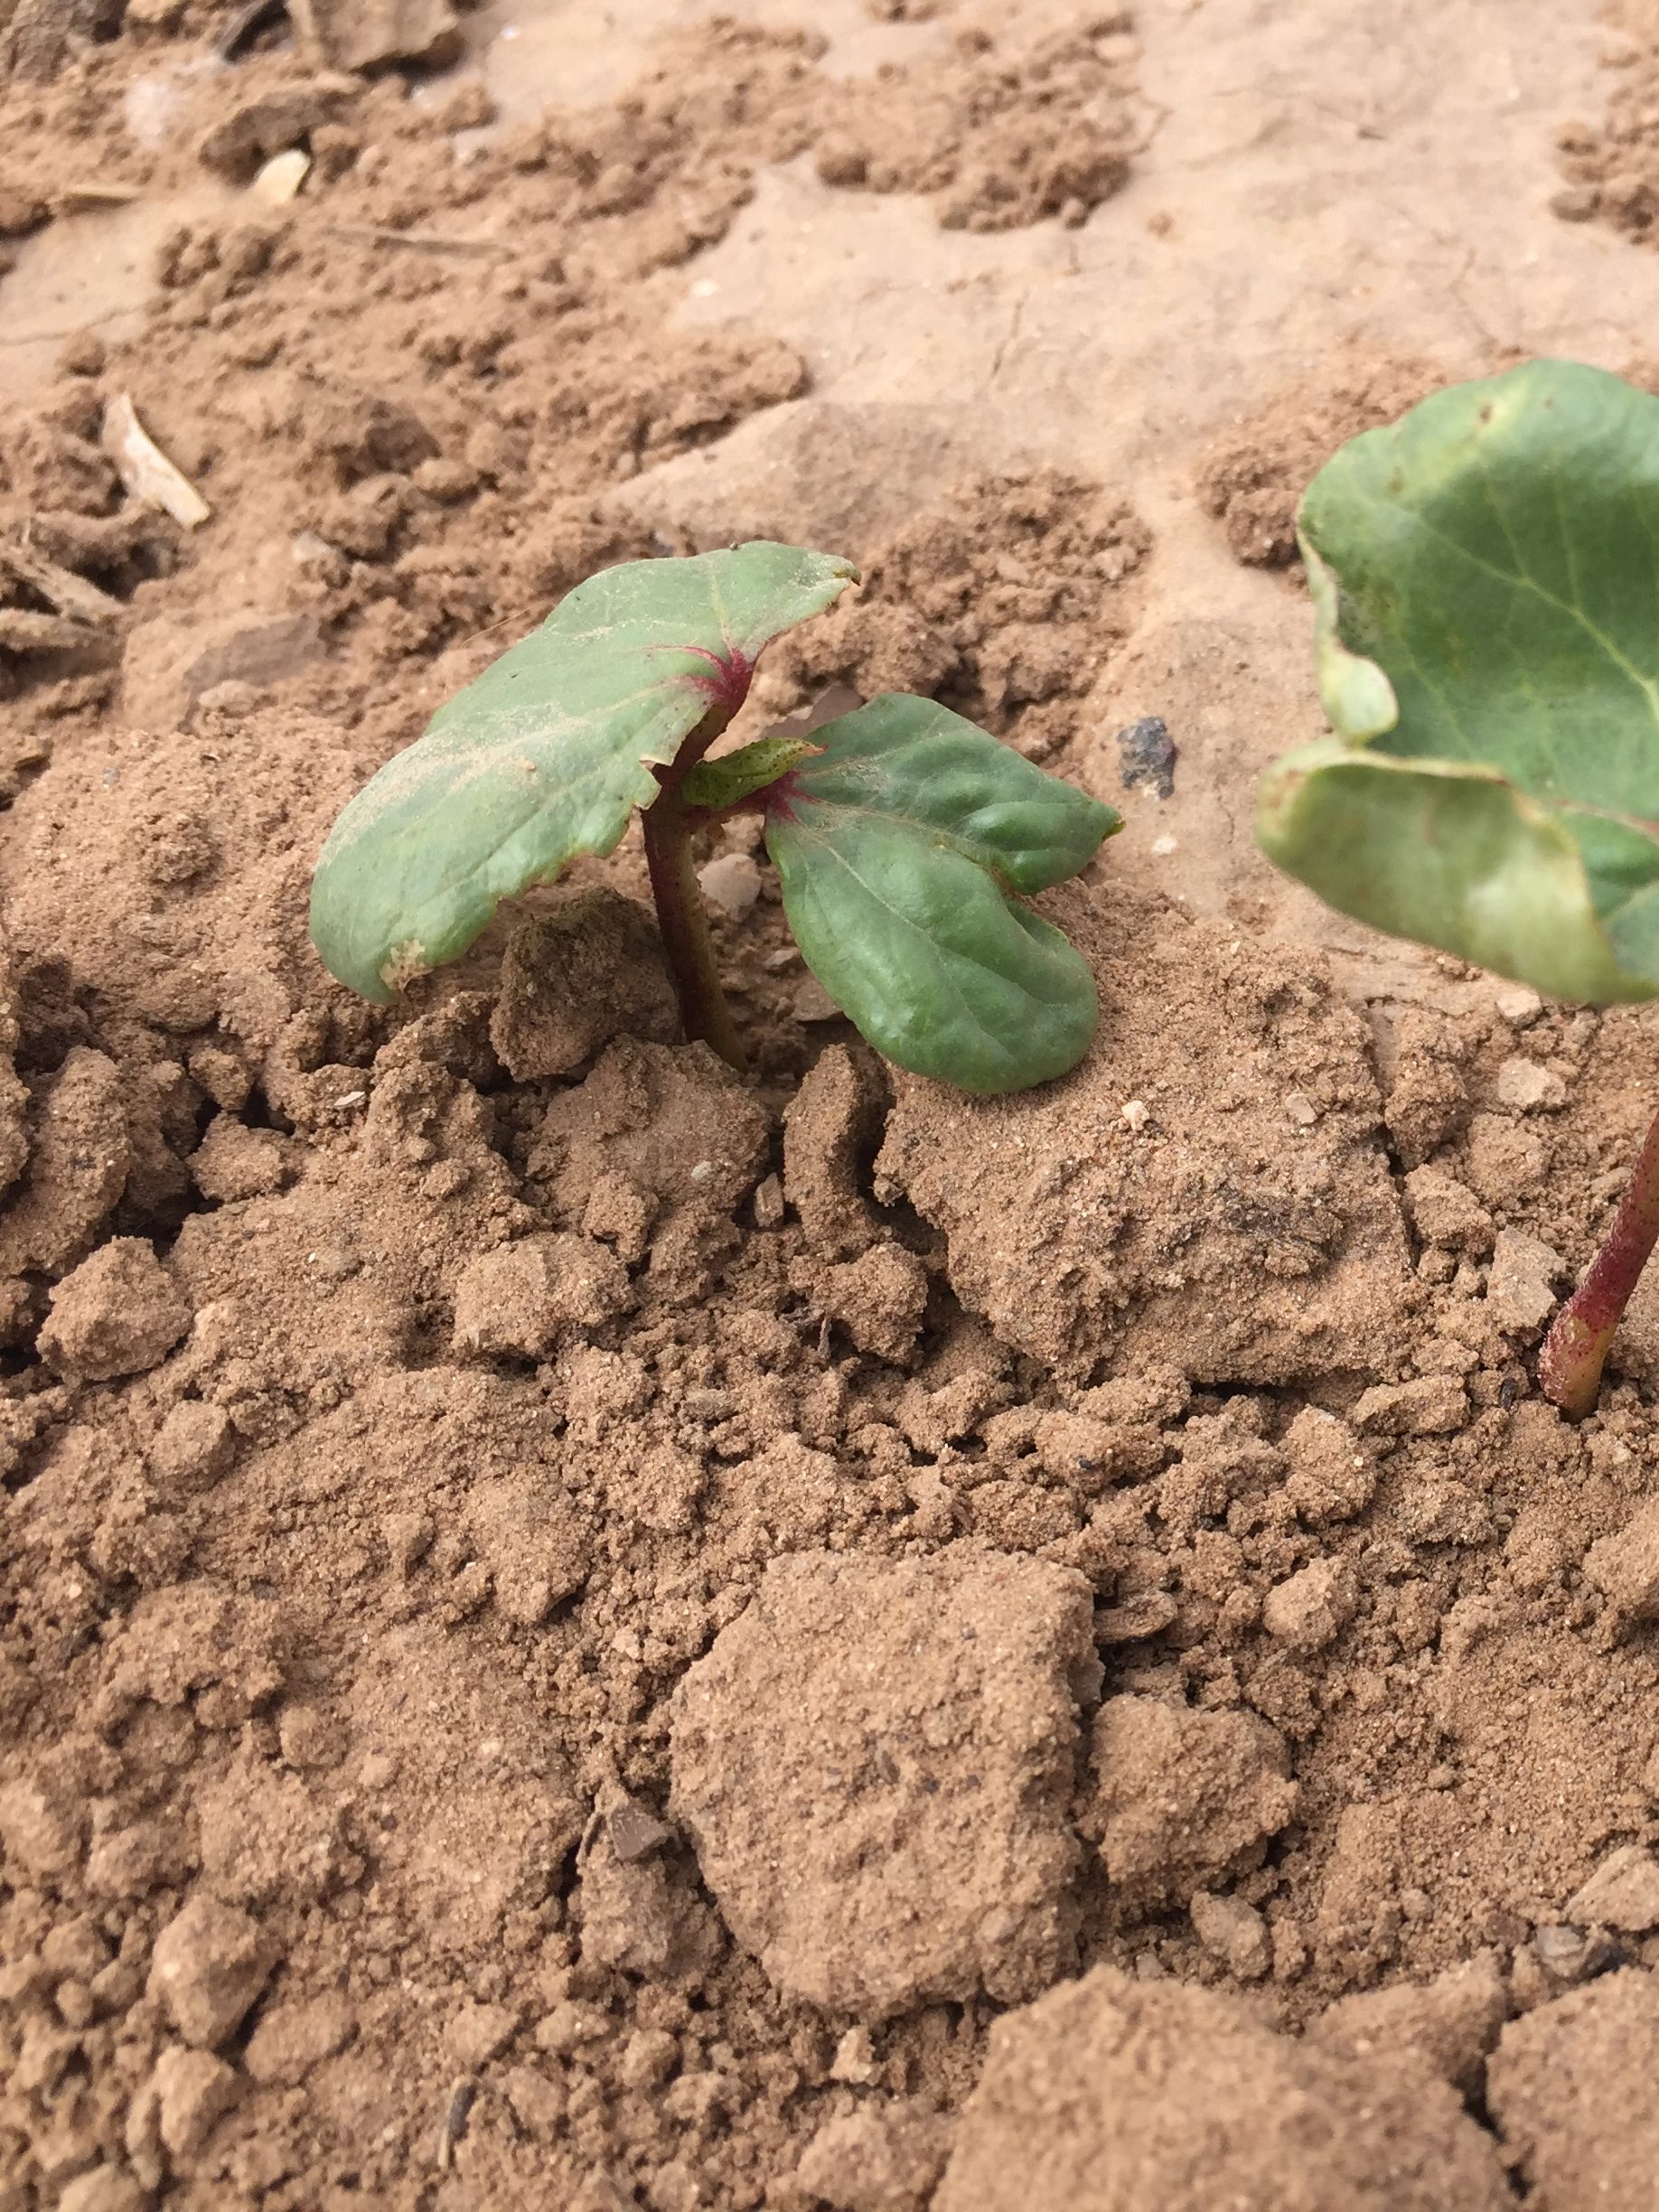 New cotton plant breaking through soil might not need as much fertilizer